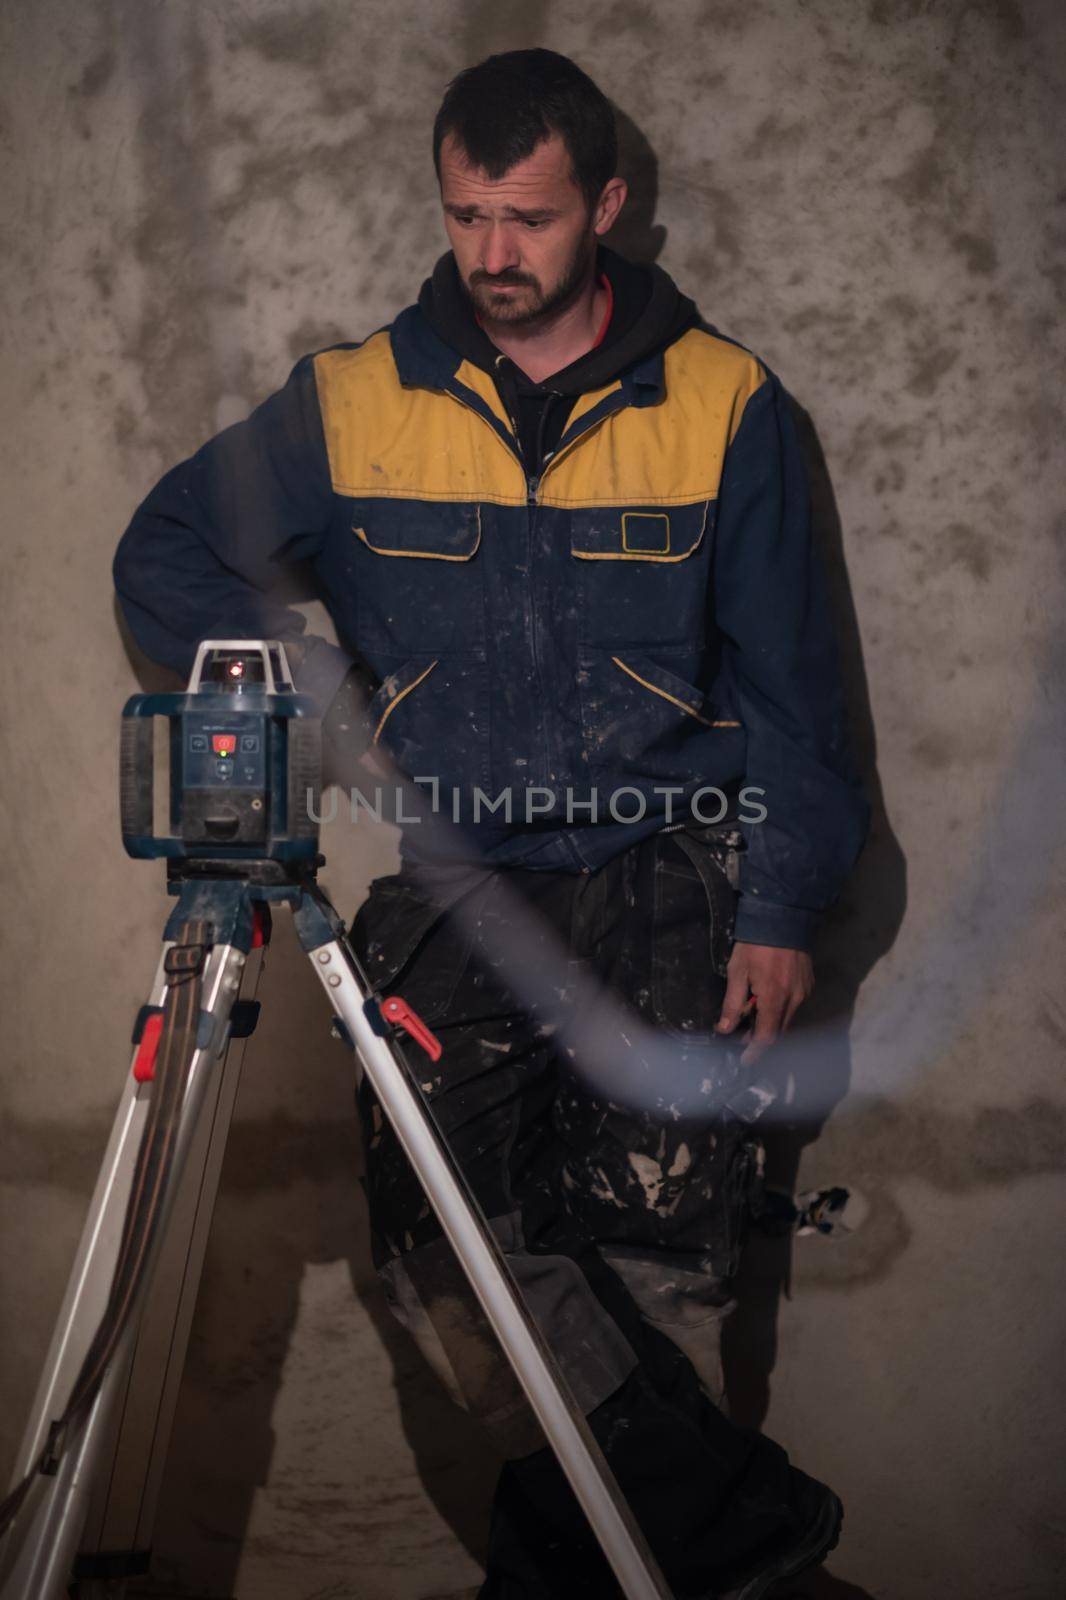 Laser equipment at a construction site by dotshock